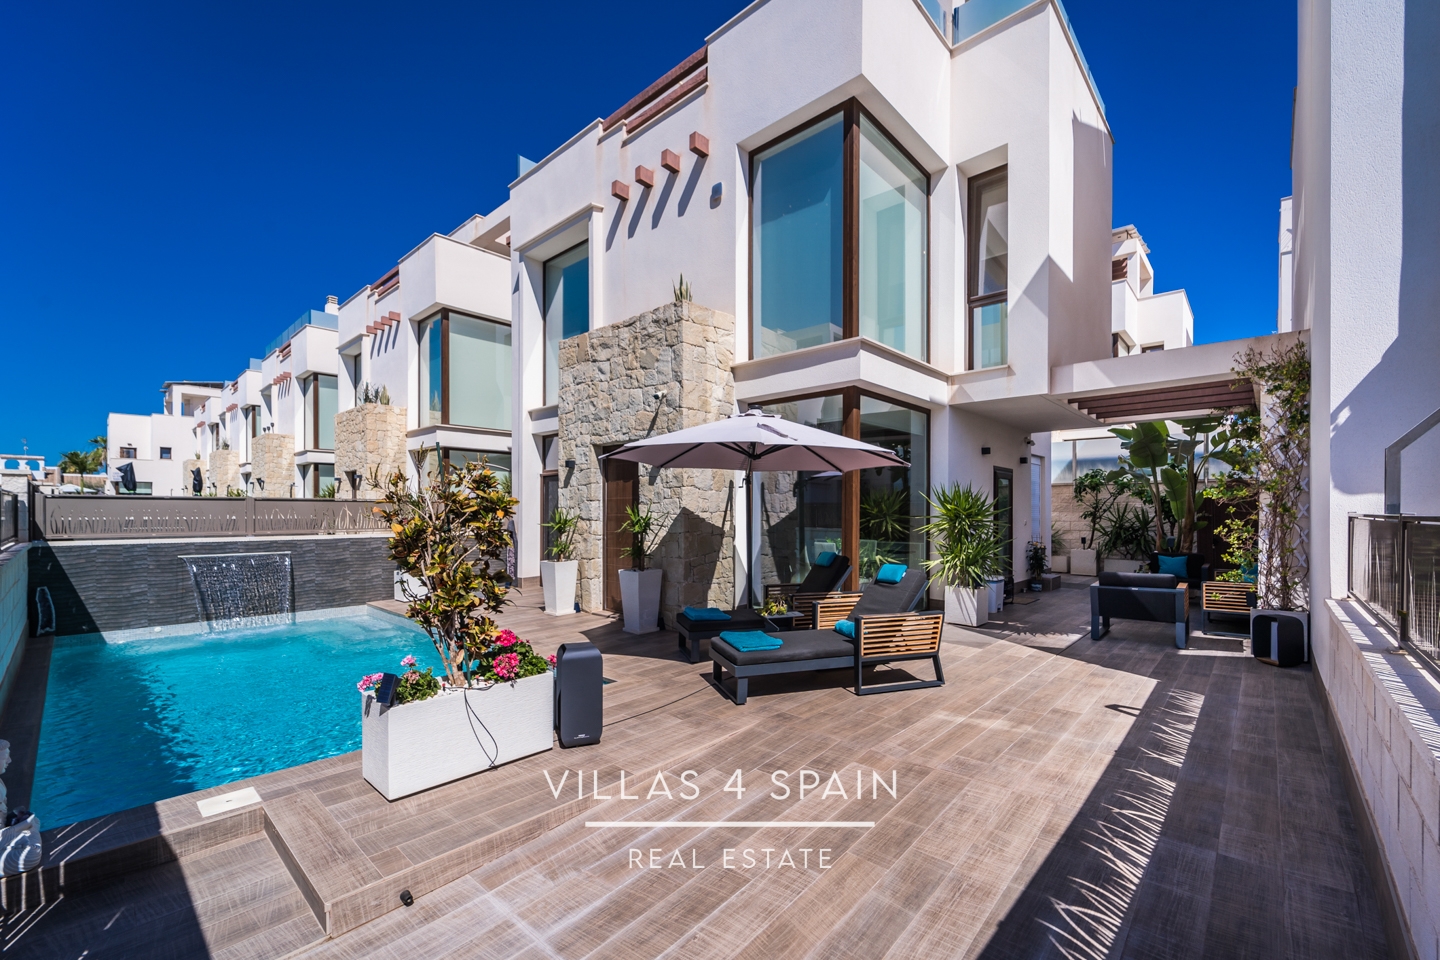 4 bedroom 3 bathroom luxury villa with private pool parking and roof terrace